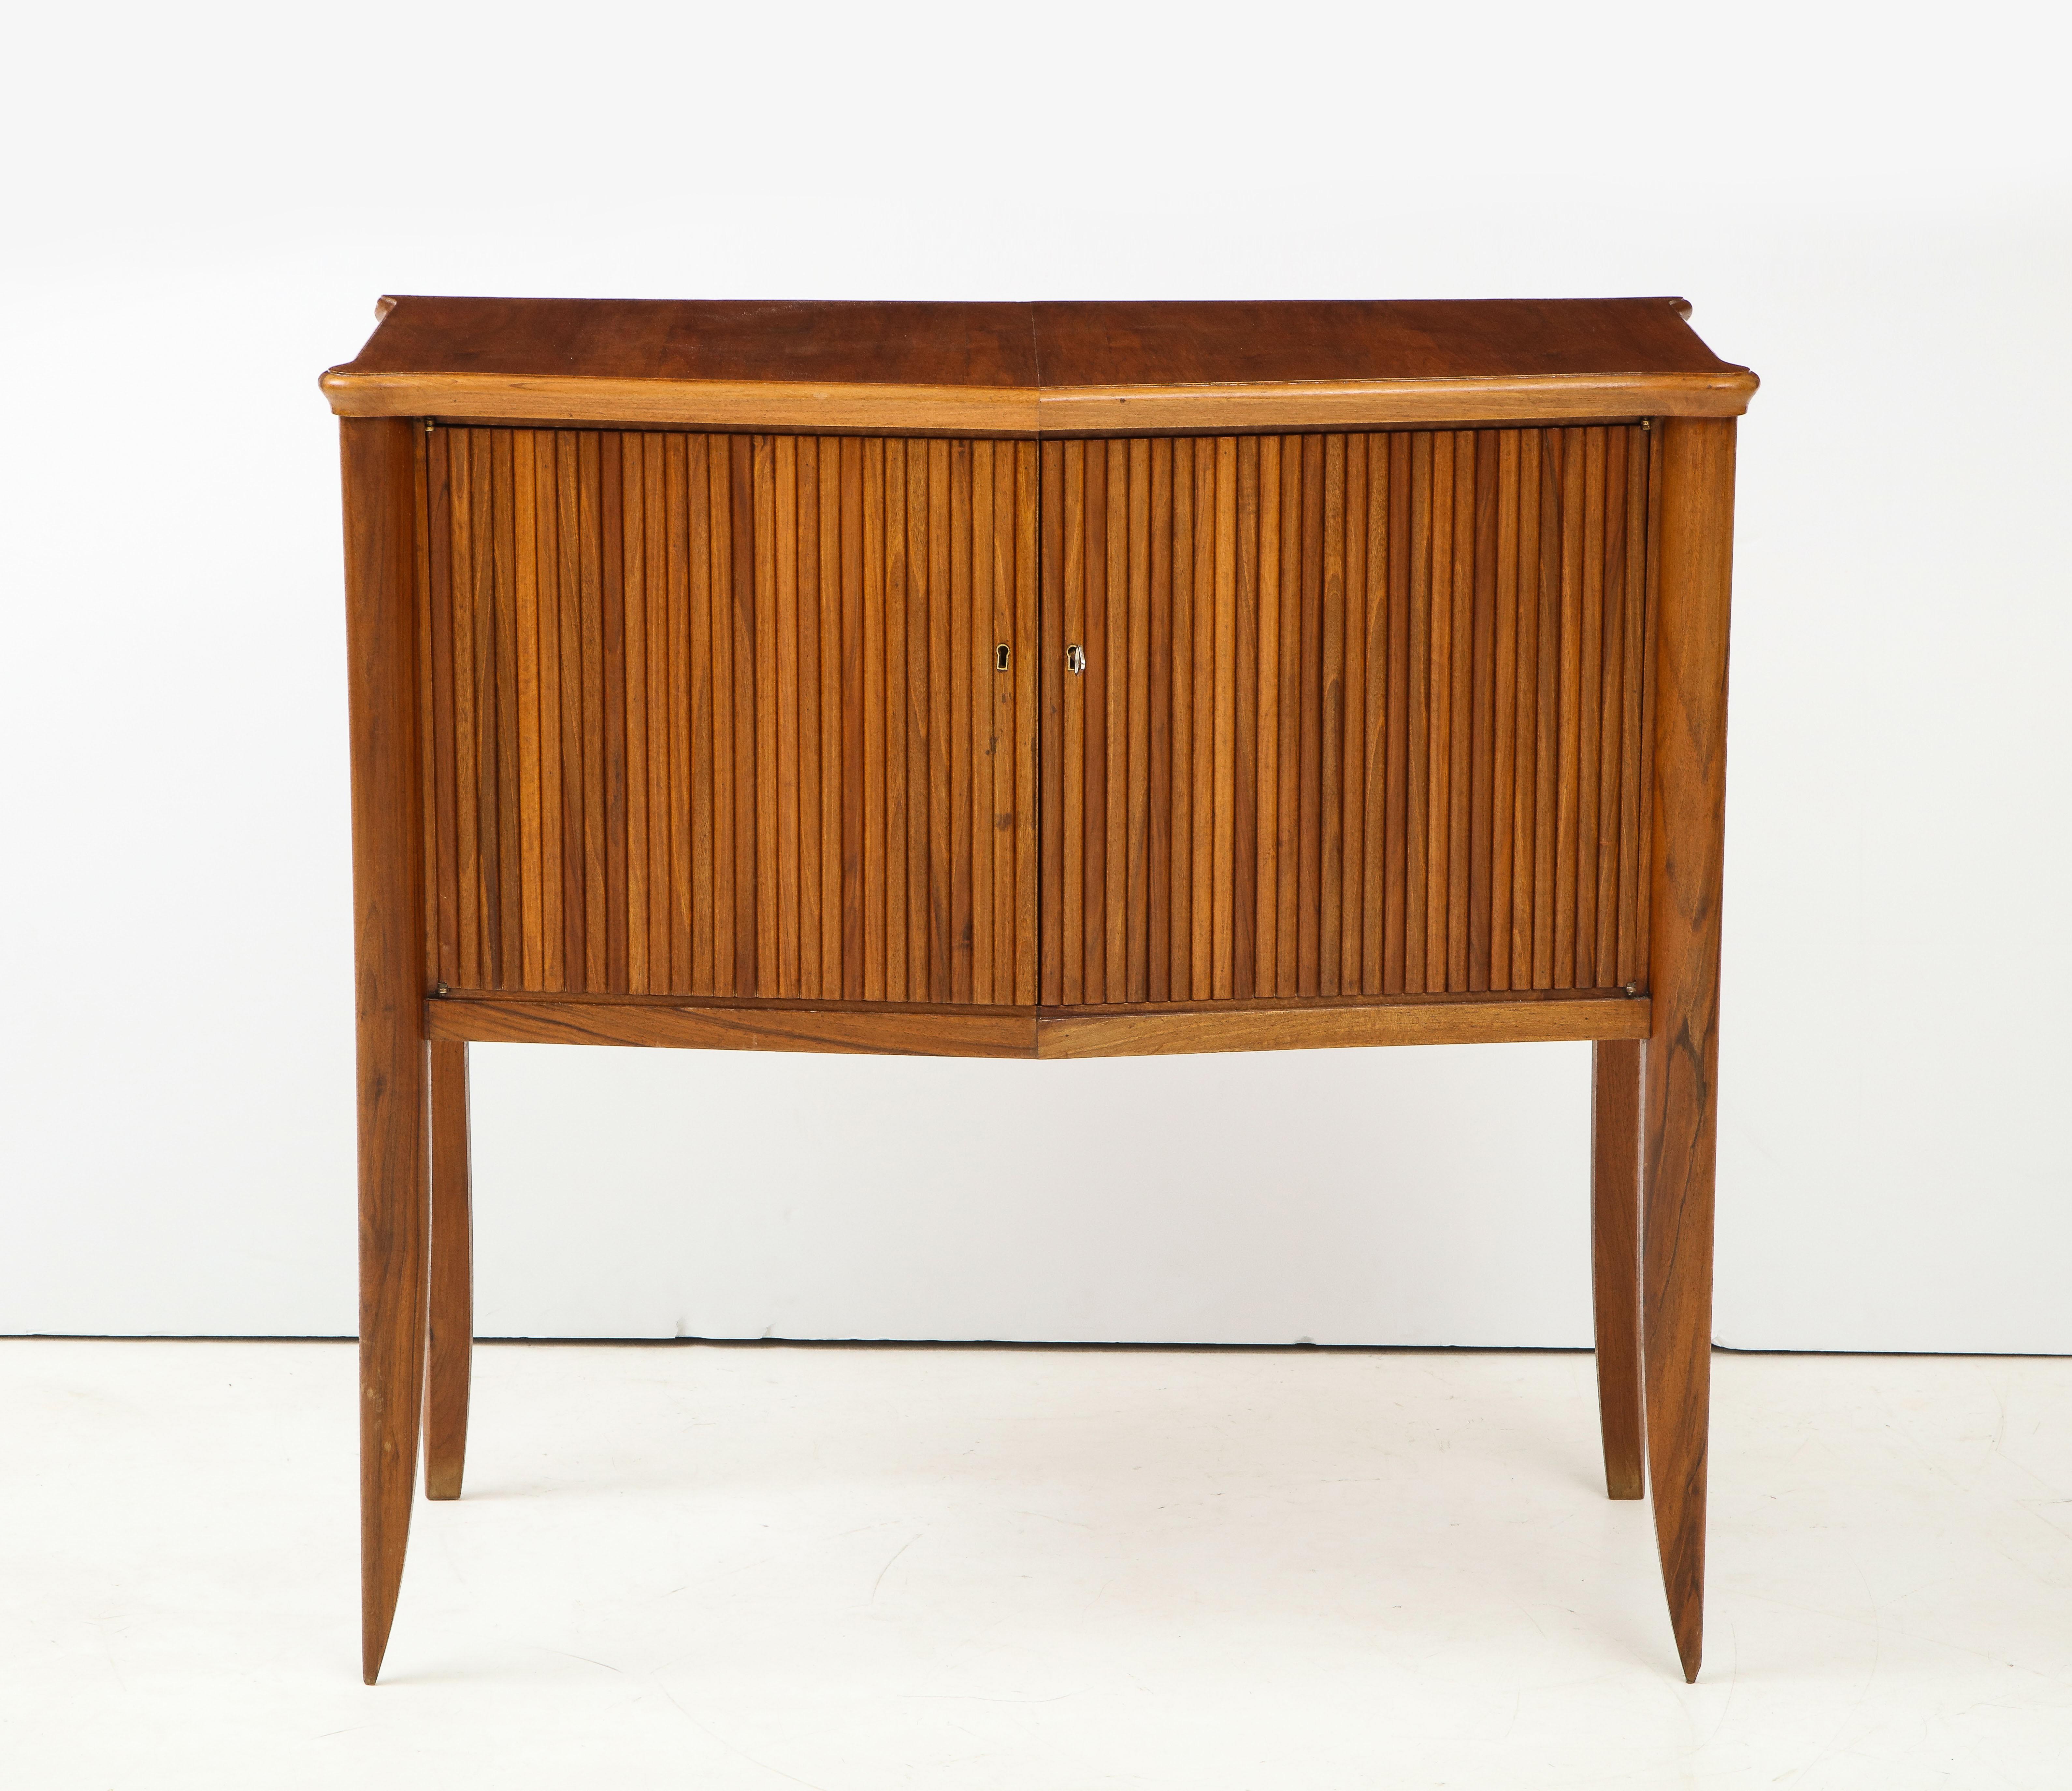 An Italian walnut two-door cabinet with ribbed carving, supported on elegantly tapered legs, the interior fitted with one shelf.
Italy, circa 1940
Size: 39 1/2